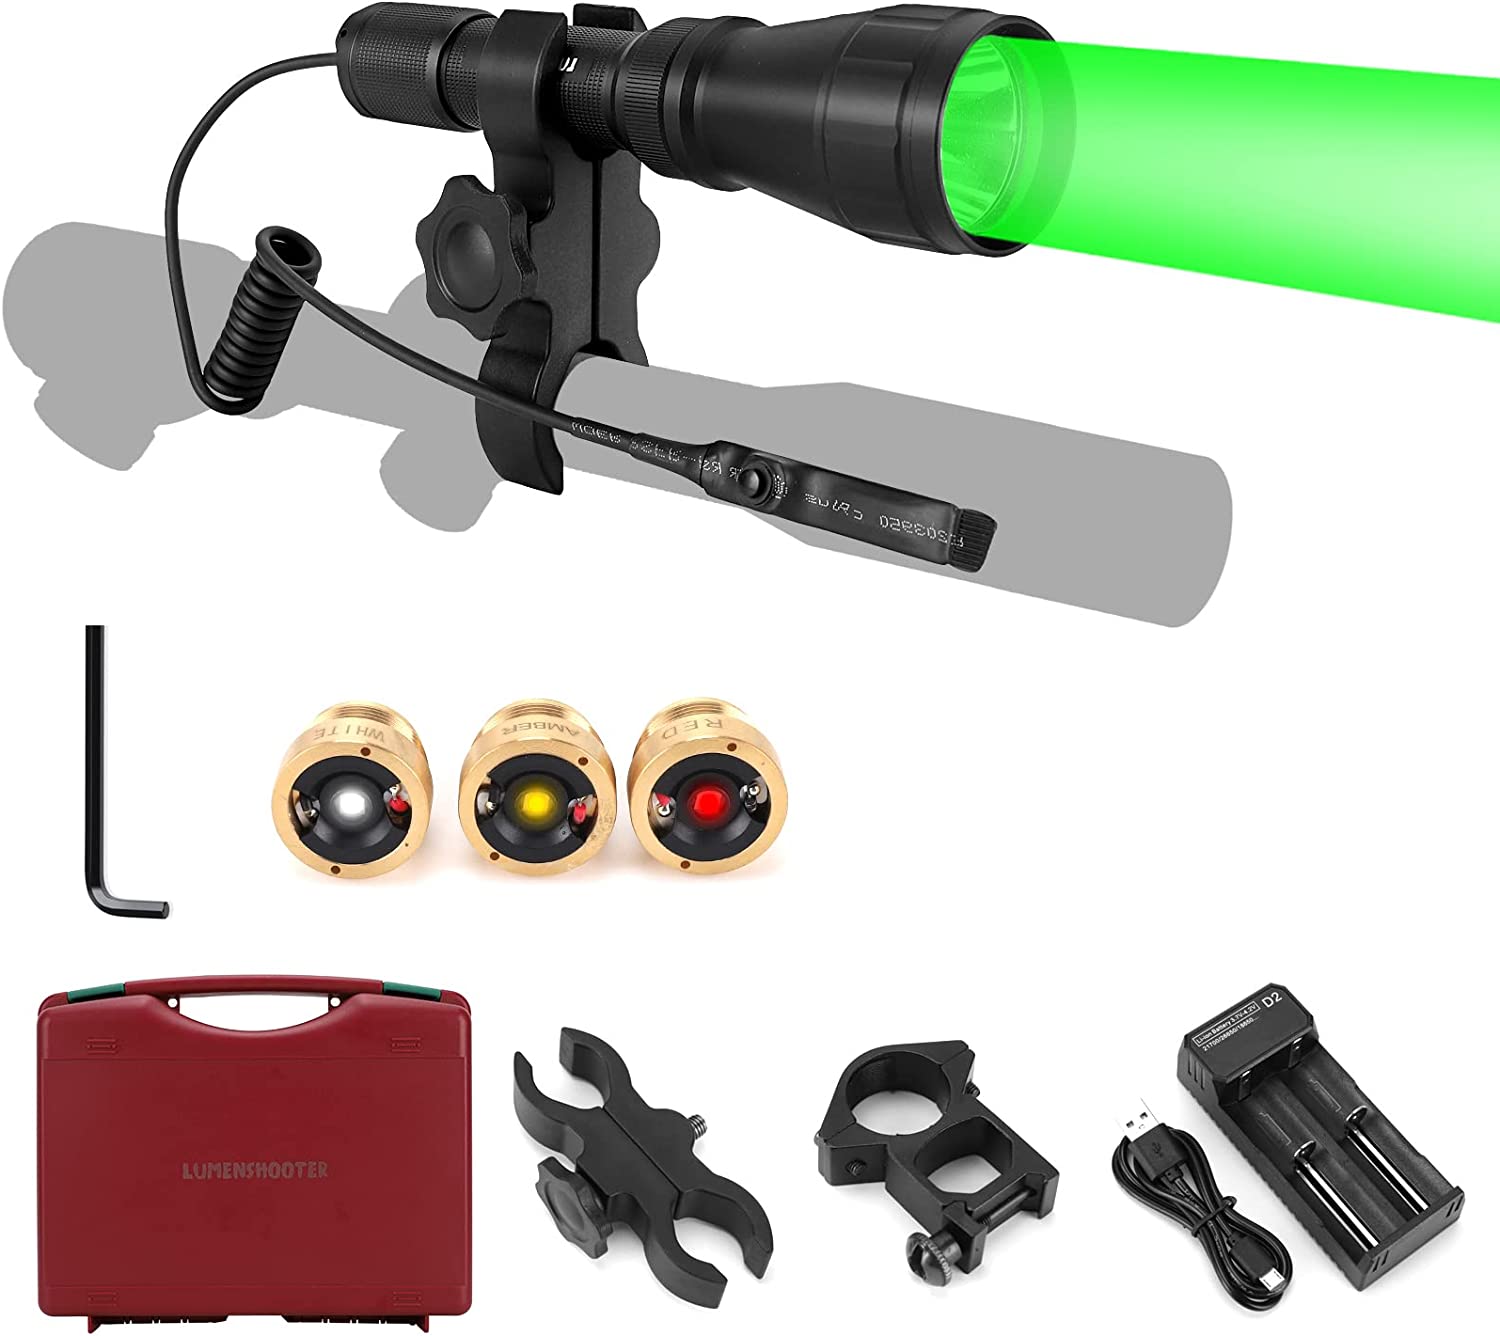 LUMENSHOOTER LS350 Predator Light Kit, Red Green White Amber Hunting Flashlight with Scope Rail Mount, Max. 10 Hours Rechargeable Batteries for Hog Coyote Coon Varmint Rabbit Night Hunting